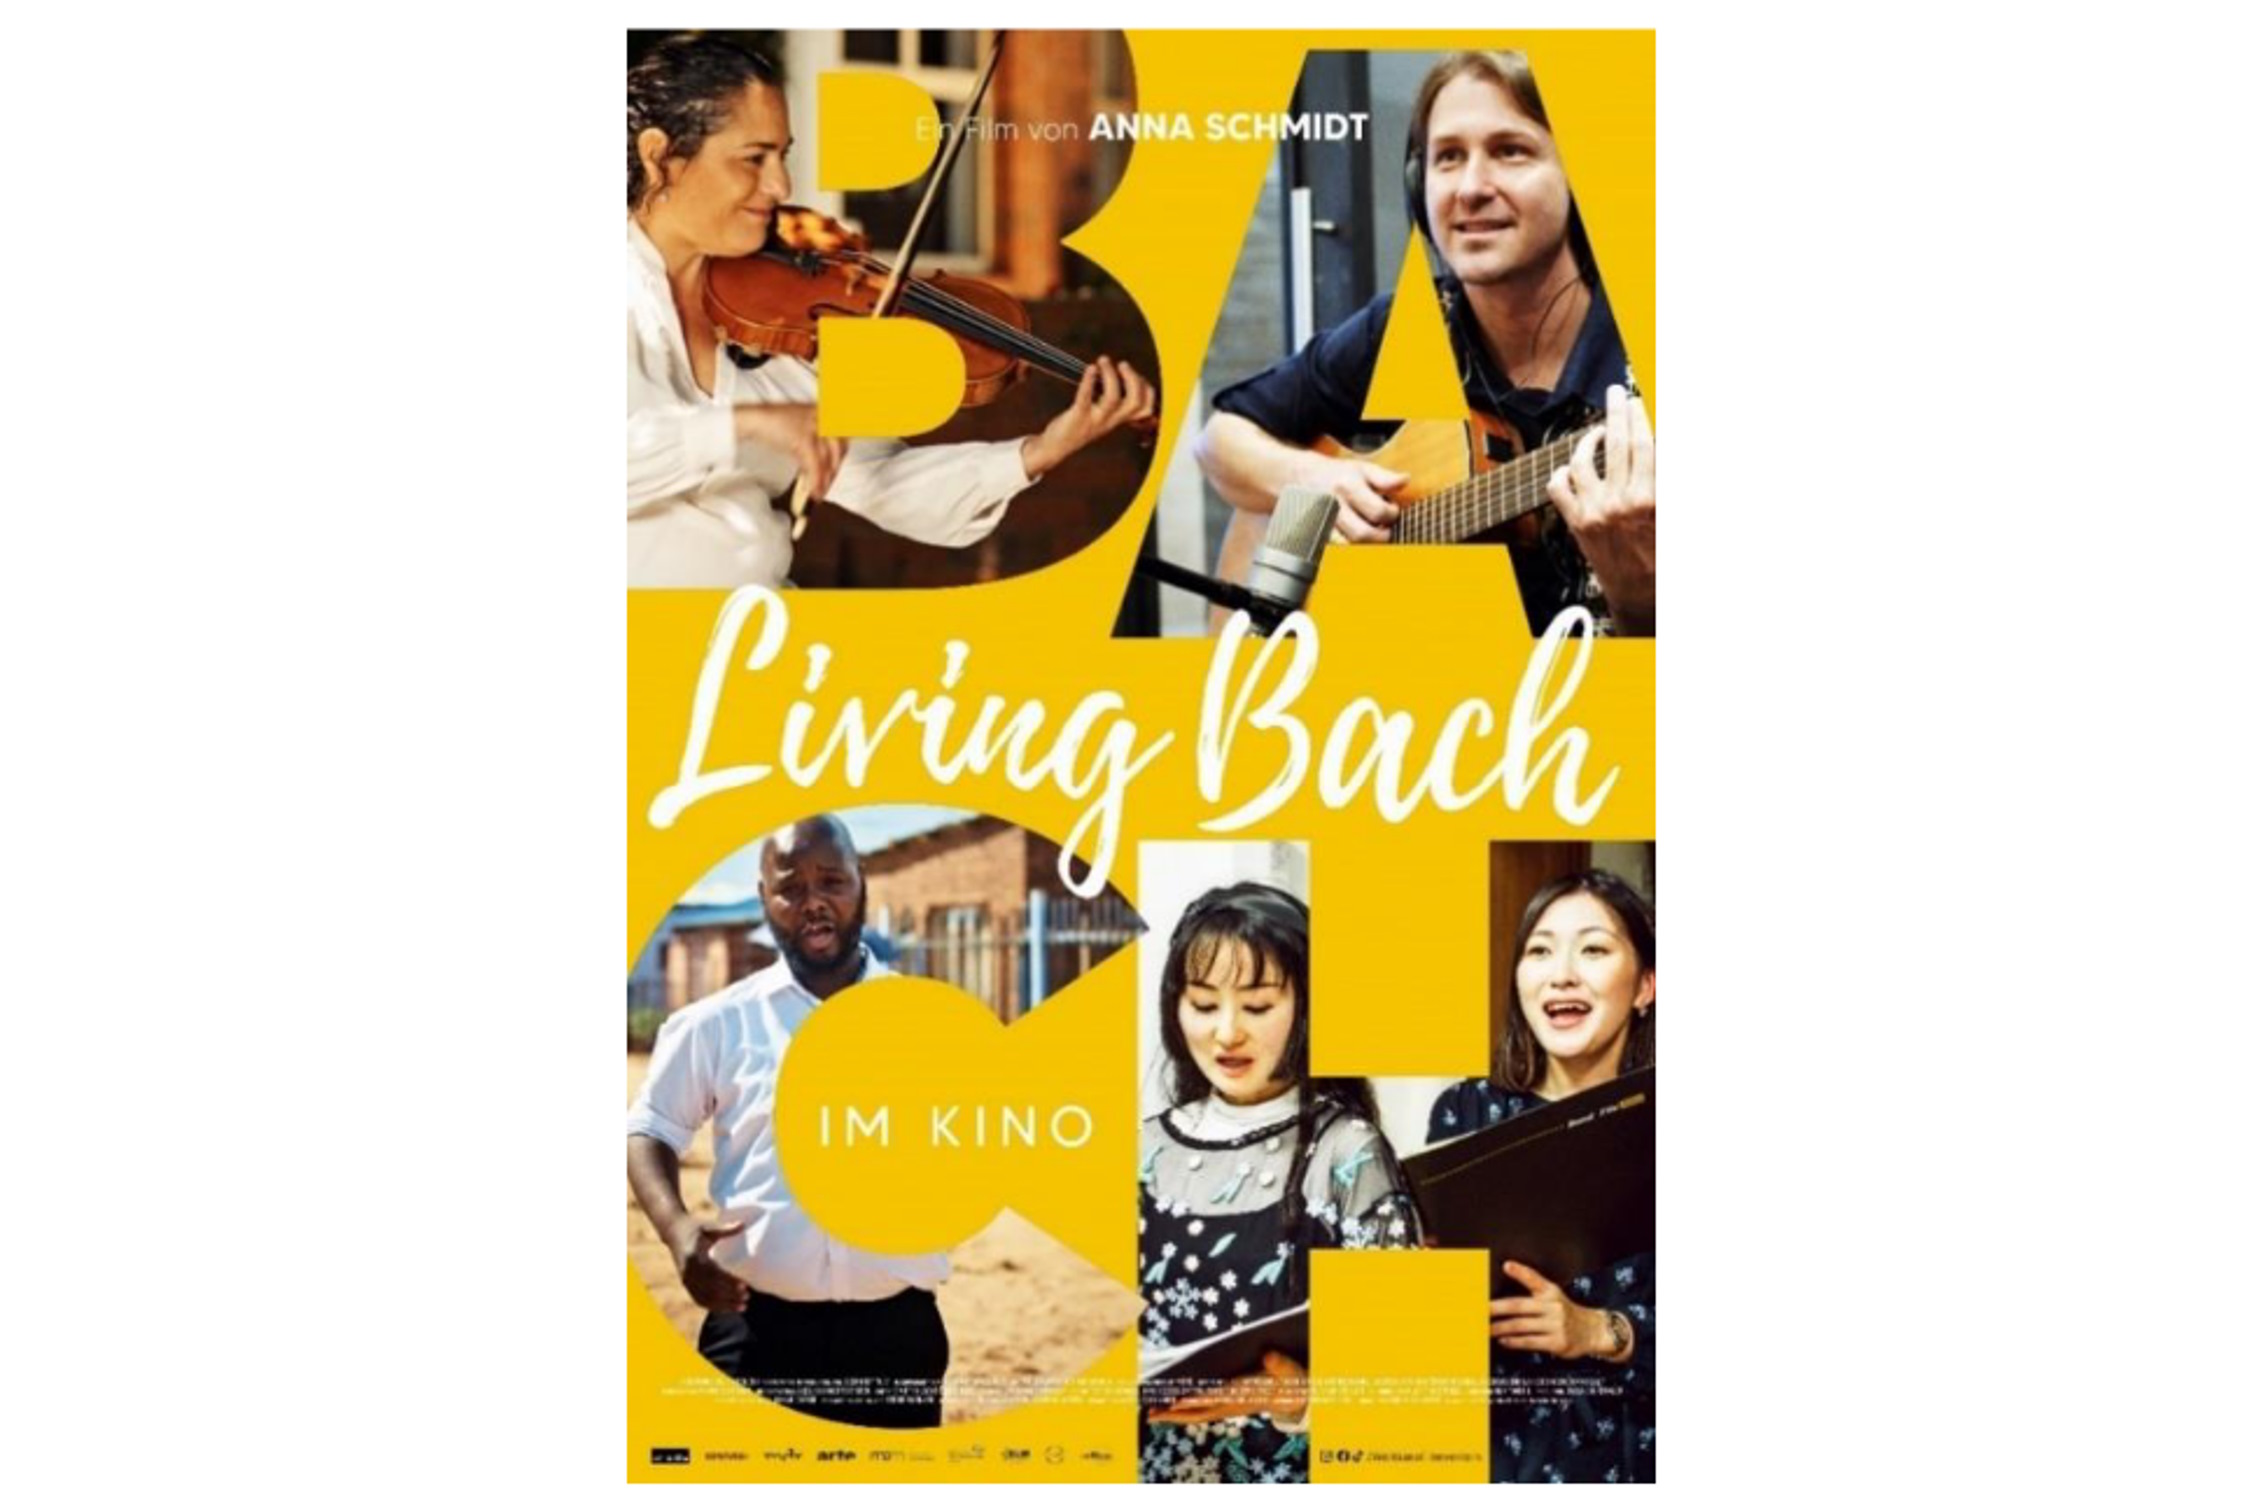 “Living Bach” will be shown in cinemas on November 30 at the Leipziger Zeitung